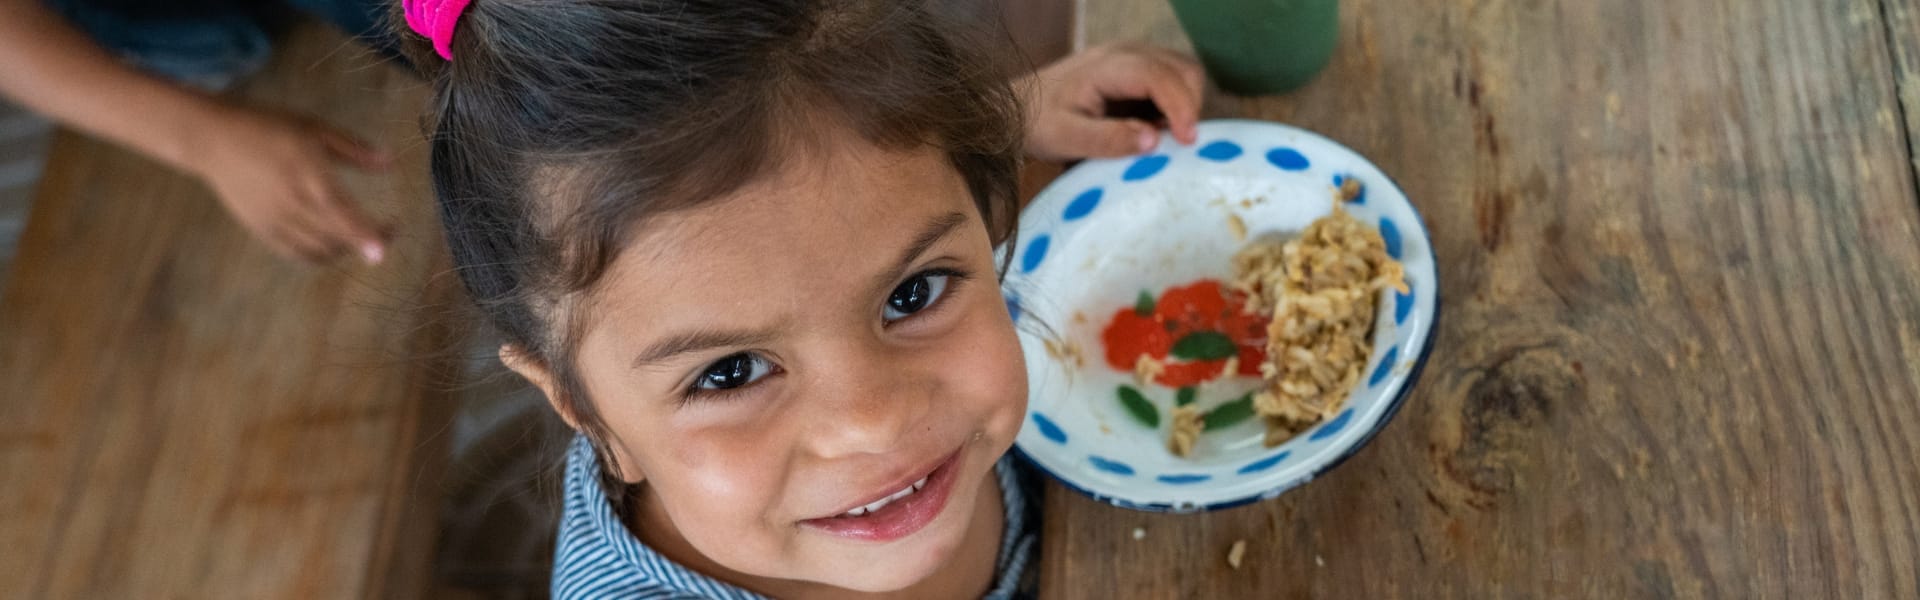 A child smiling with sitting at a table with a bowl of food